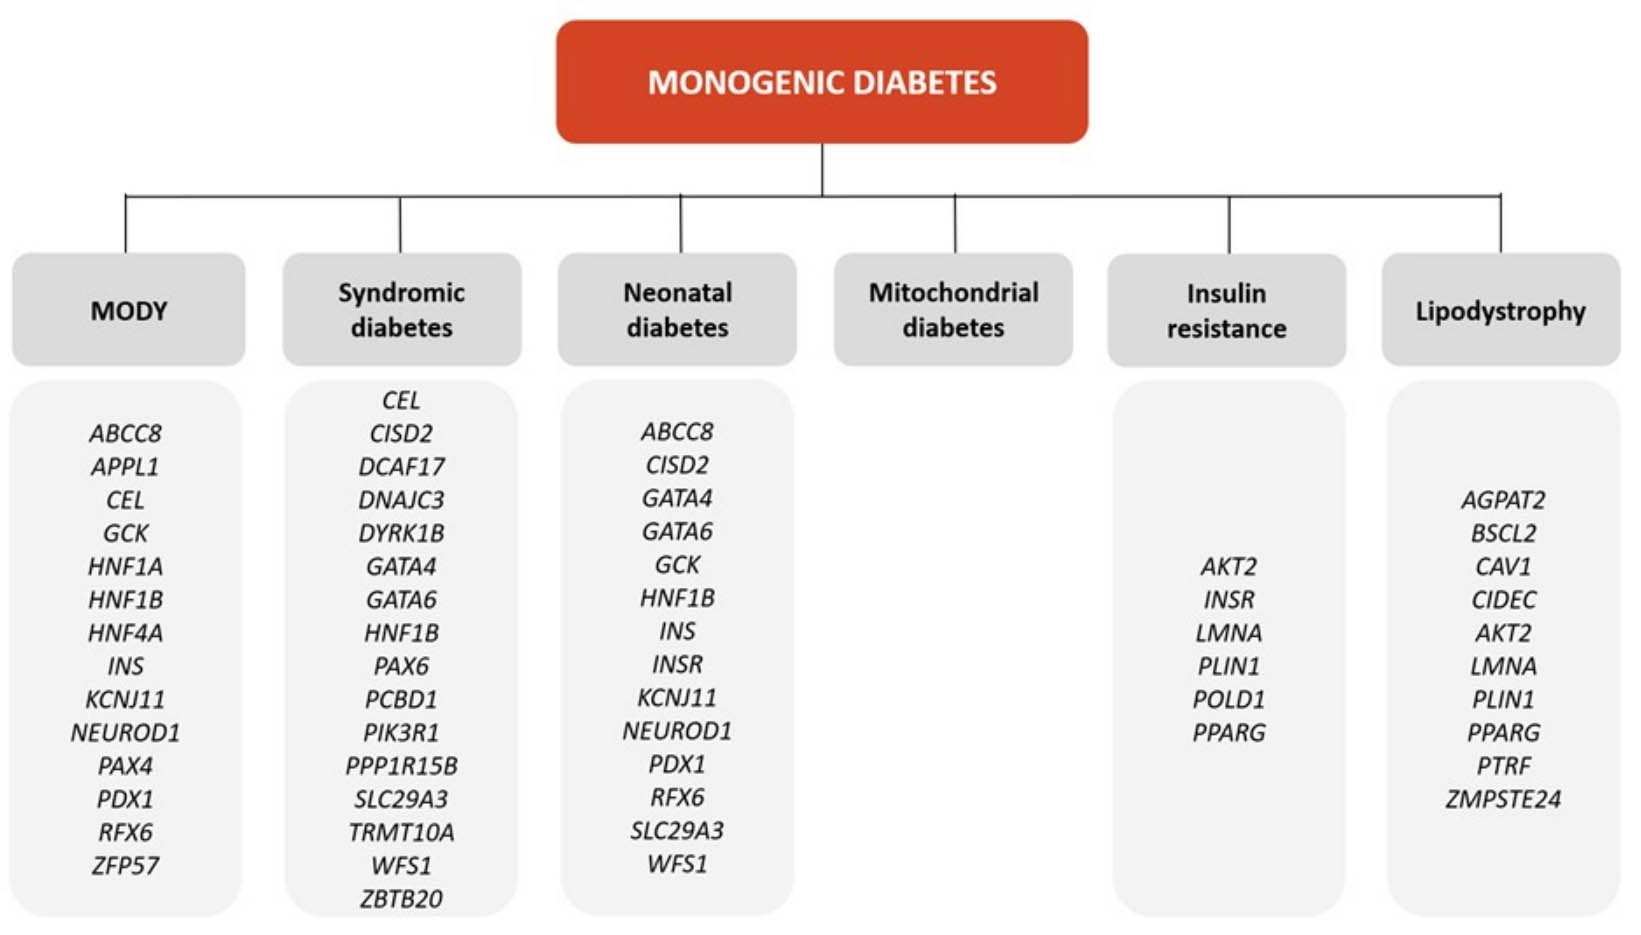 Multifaceted nature of young-onset diabetes - can genomic medicine improve the precision of diagnosis and management?